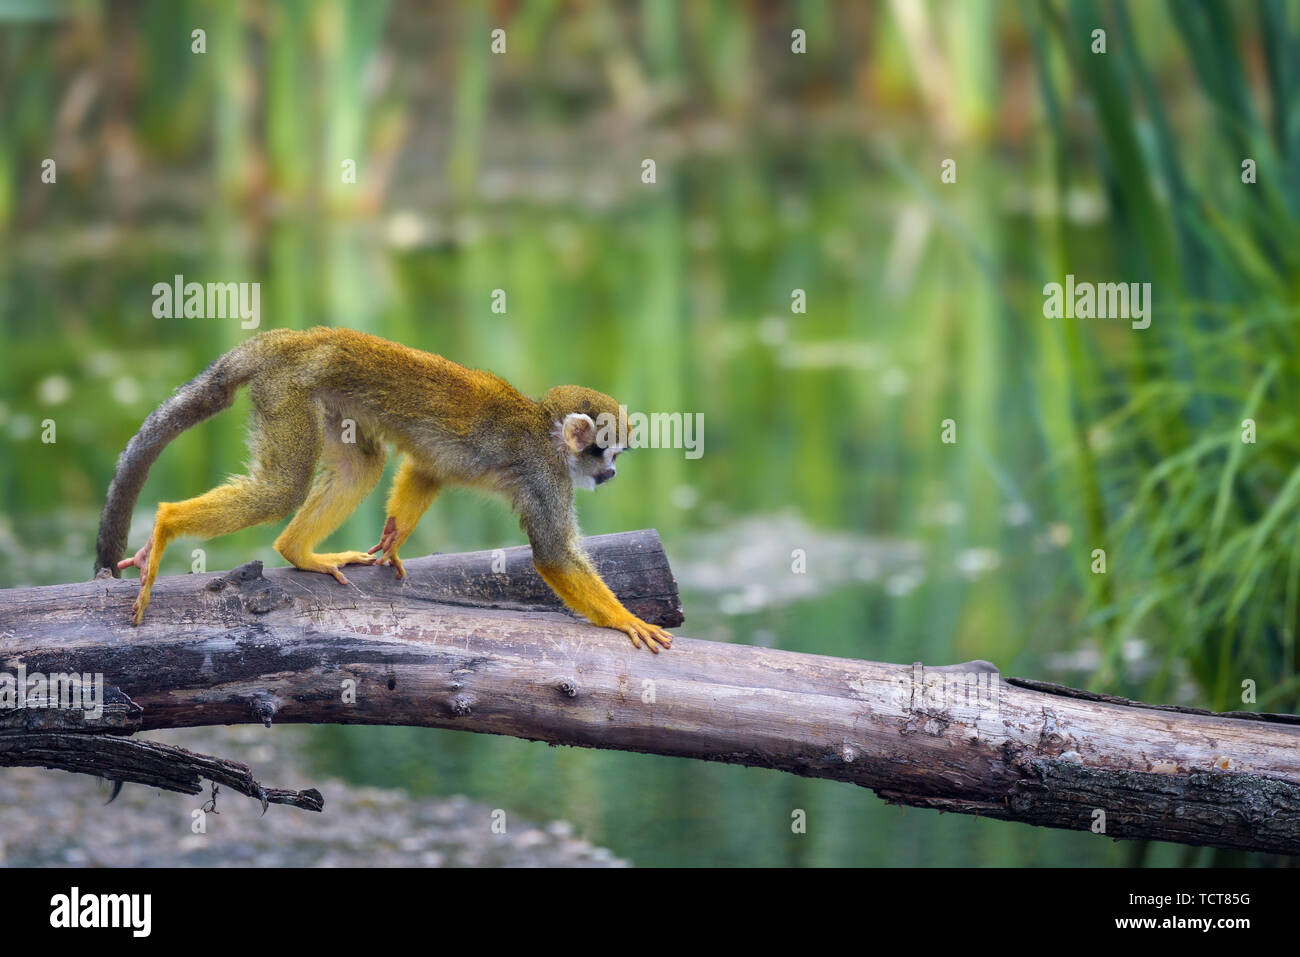 Common squirrel monkey walking on a tree branch above water Stock Photo